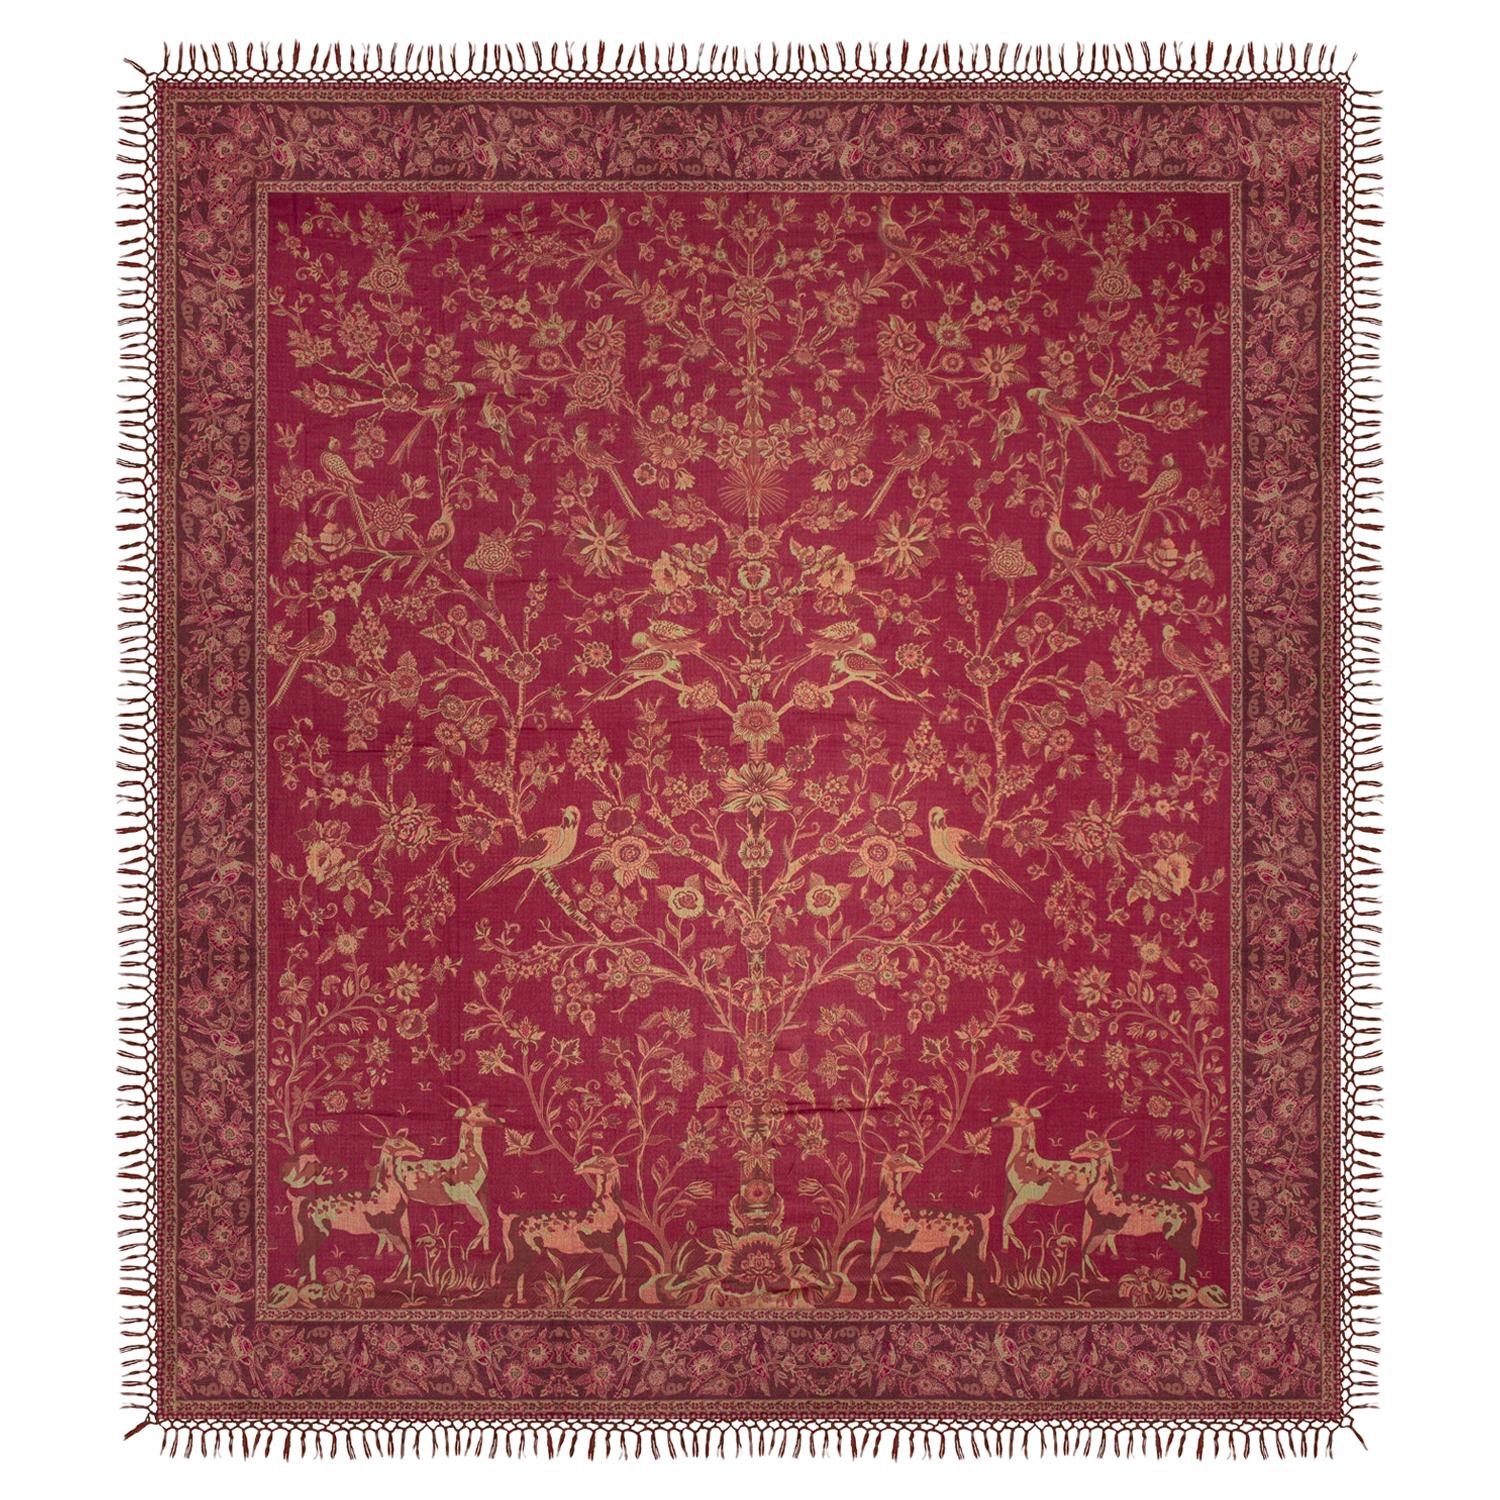 Ruby Red from Kashmir, a Cashmere Pashmina Tree of Life Coverlet or Shawl For Sale